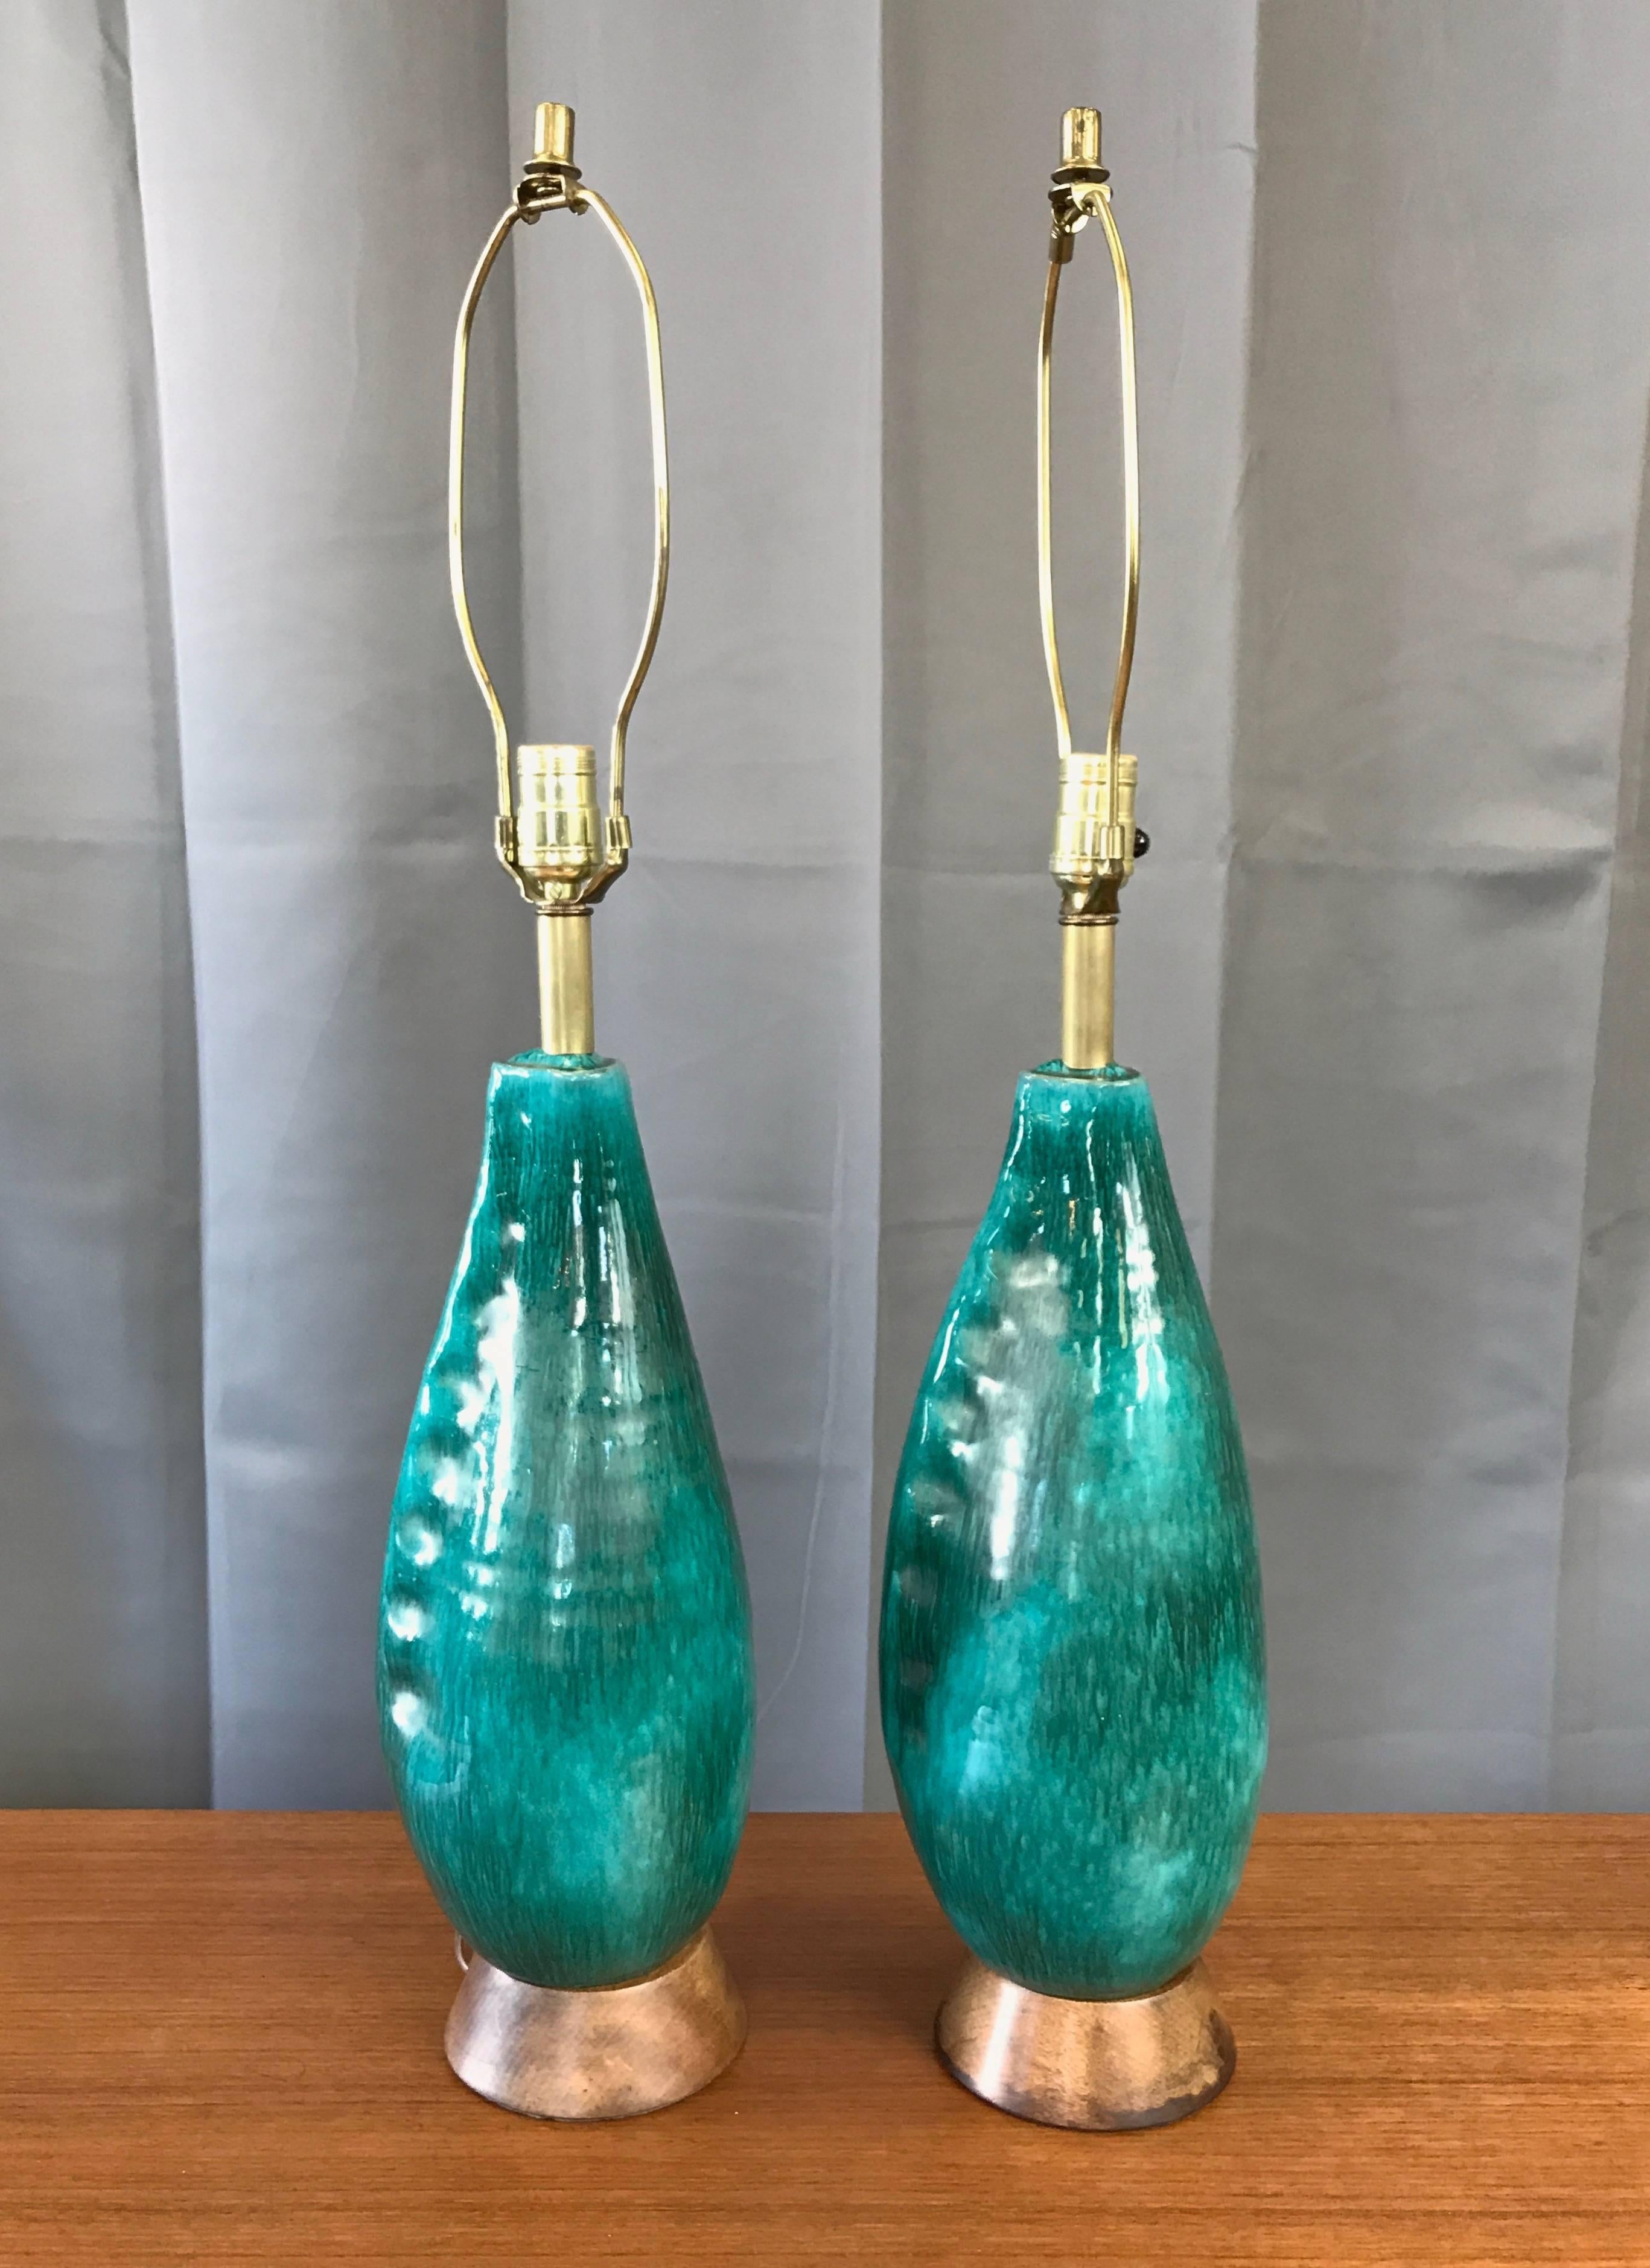 A pair of Mid-Century turquoise ceramic table lamps with wood bases by Marcello Fantoni.

Design slyly references its Italian roots with a calzone-like body and finger-pinched edge. Multi-layered glaze has a very vibrant turquoise ground washed in